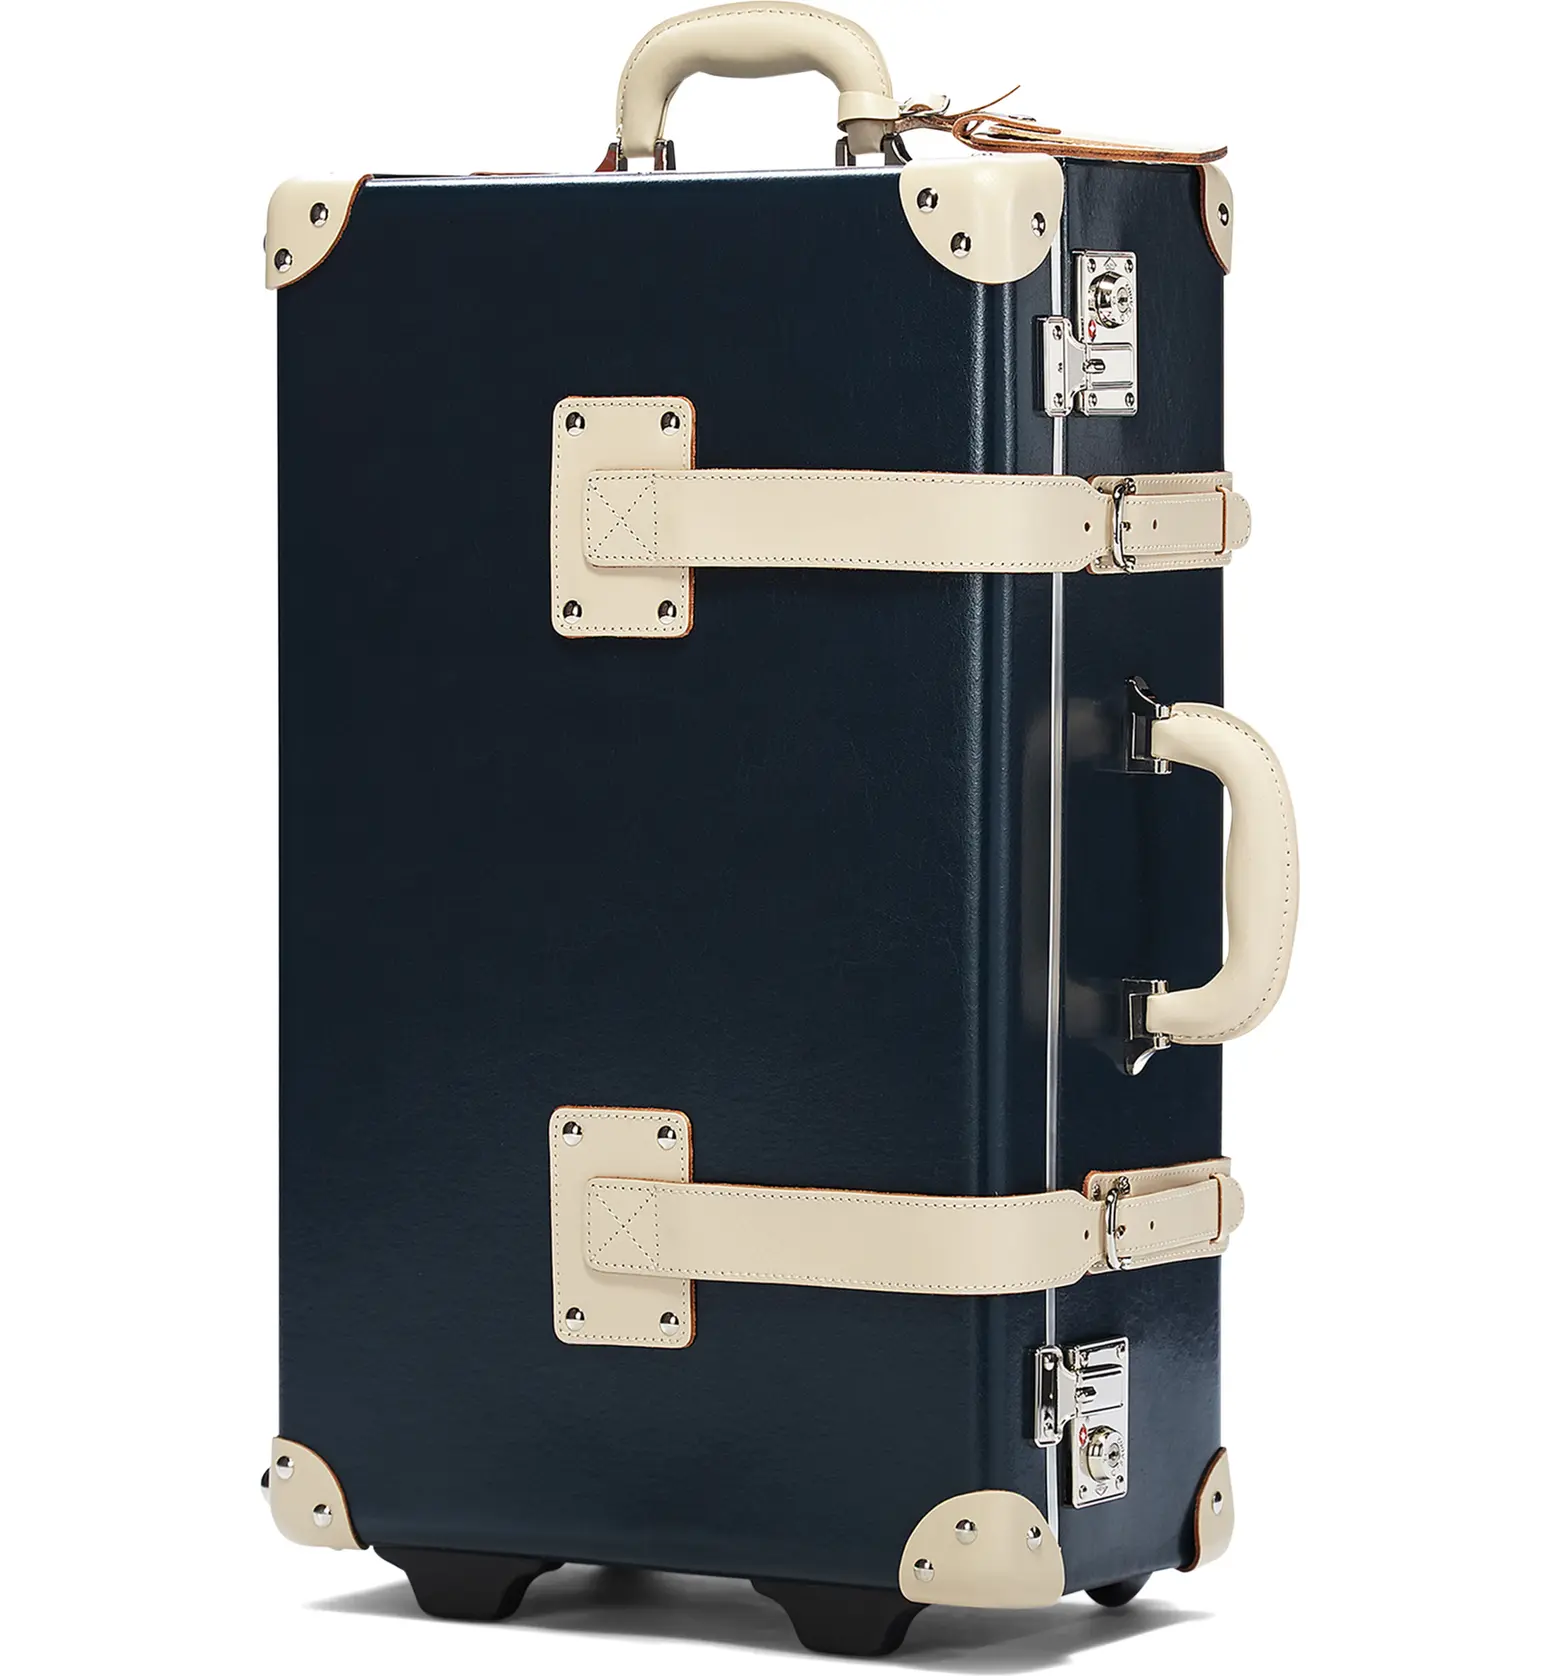 Luggage for Holiday Gift Giving - nordstrom